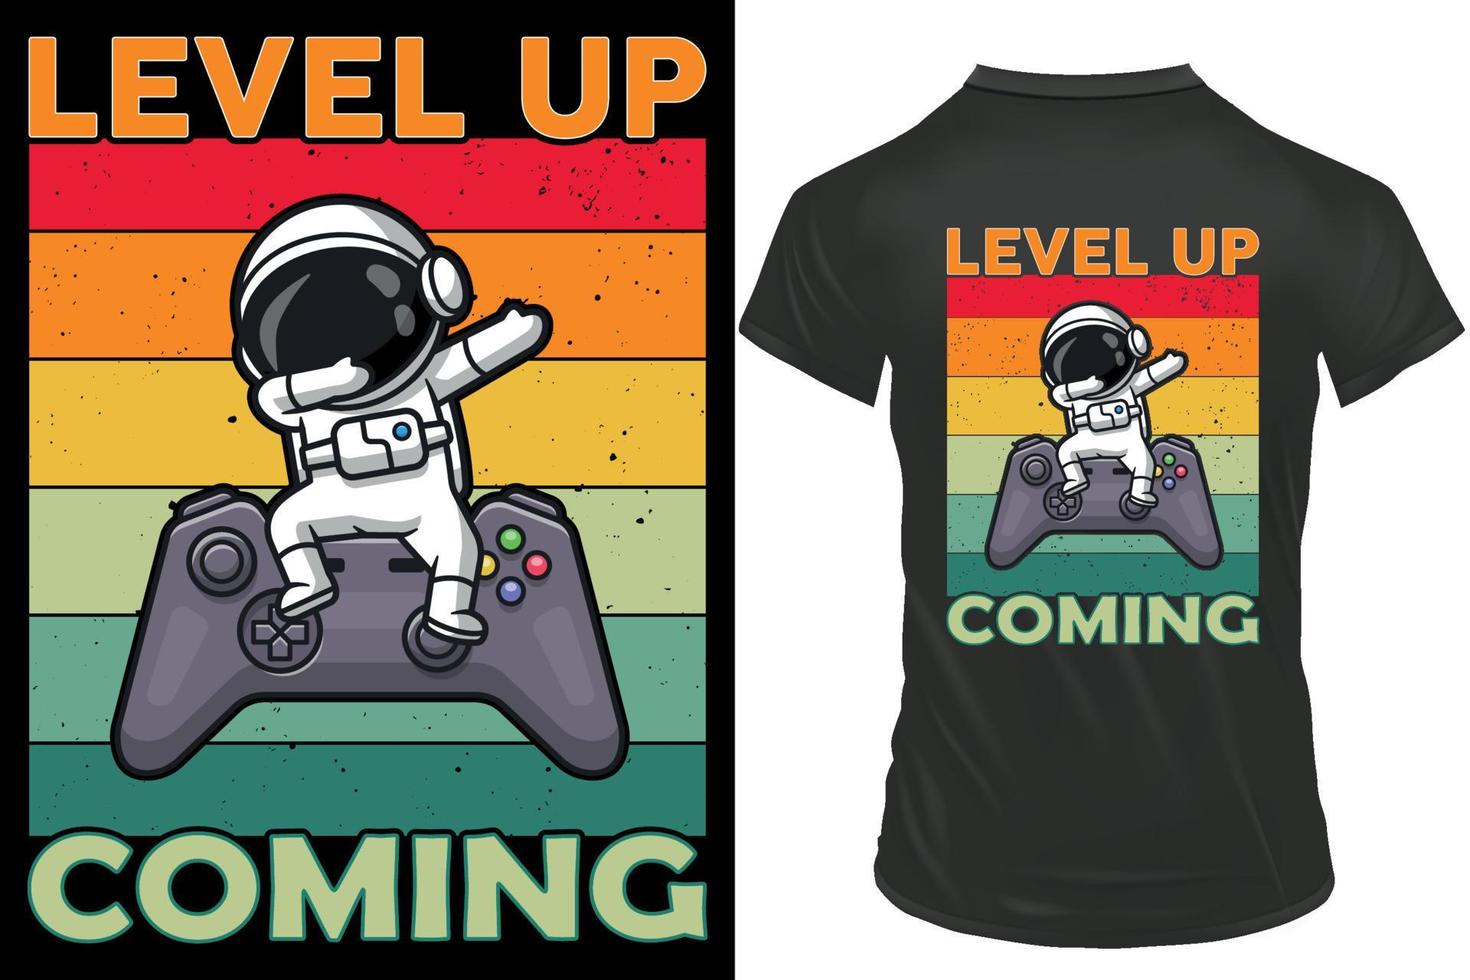 level up coming texture retro vintage Gaming t-shirt design with gaming console vector. vector